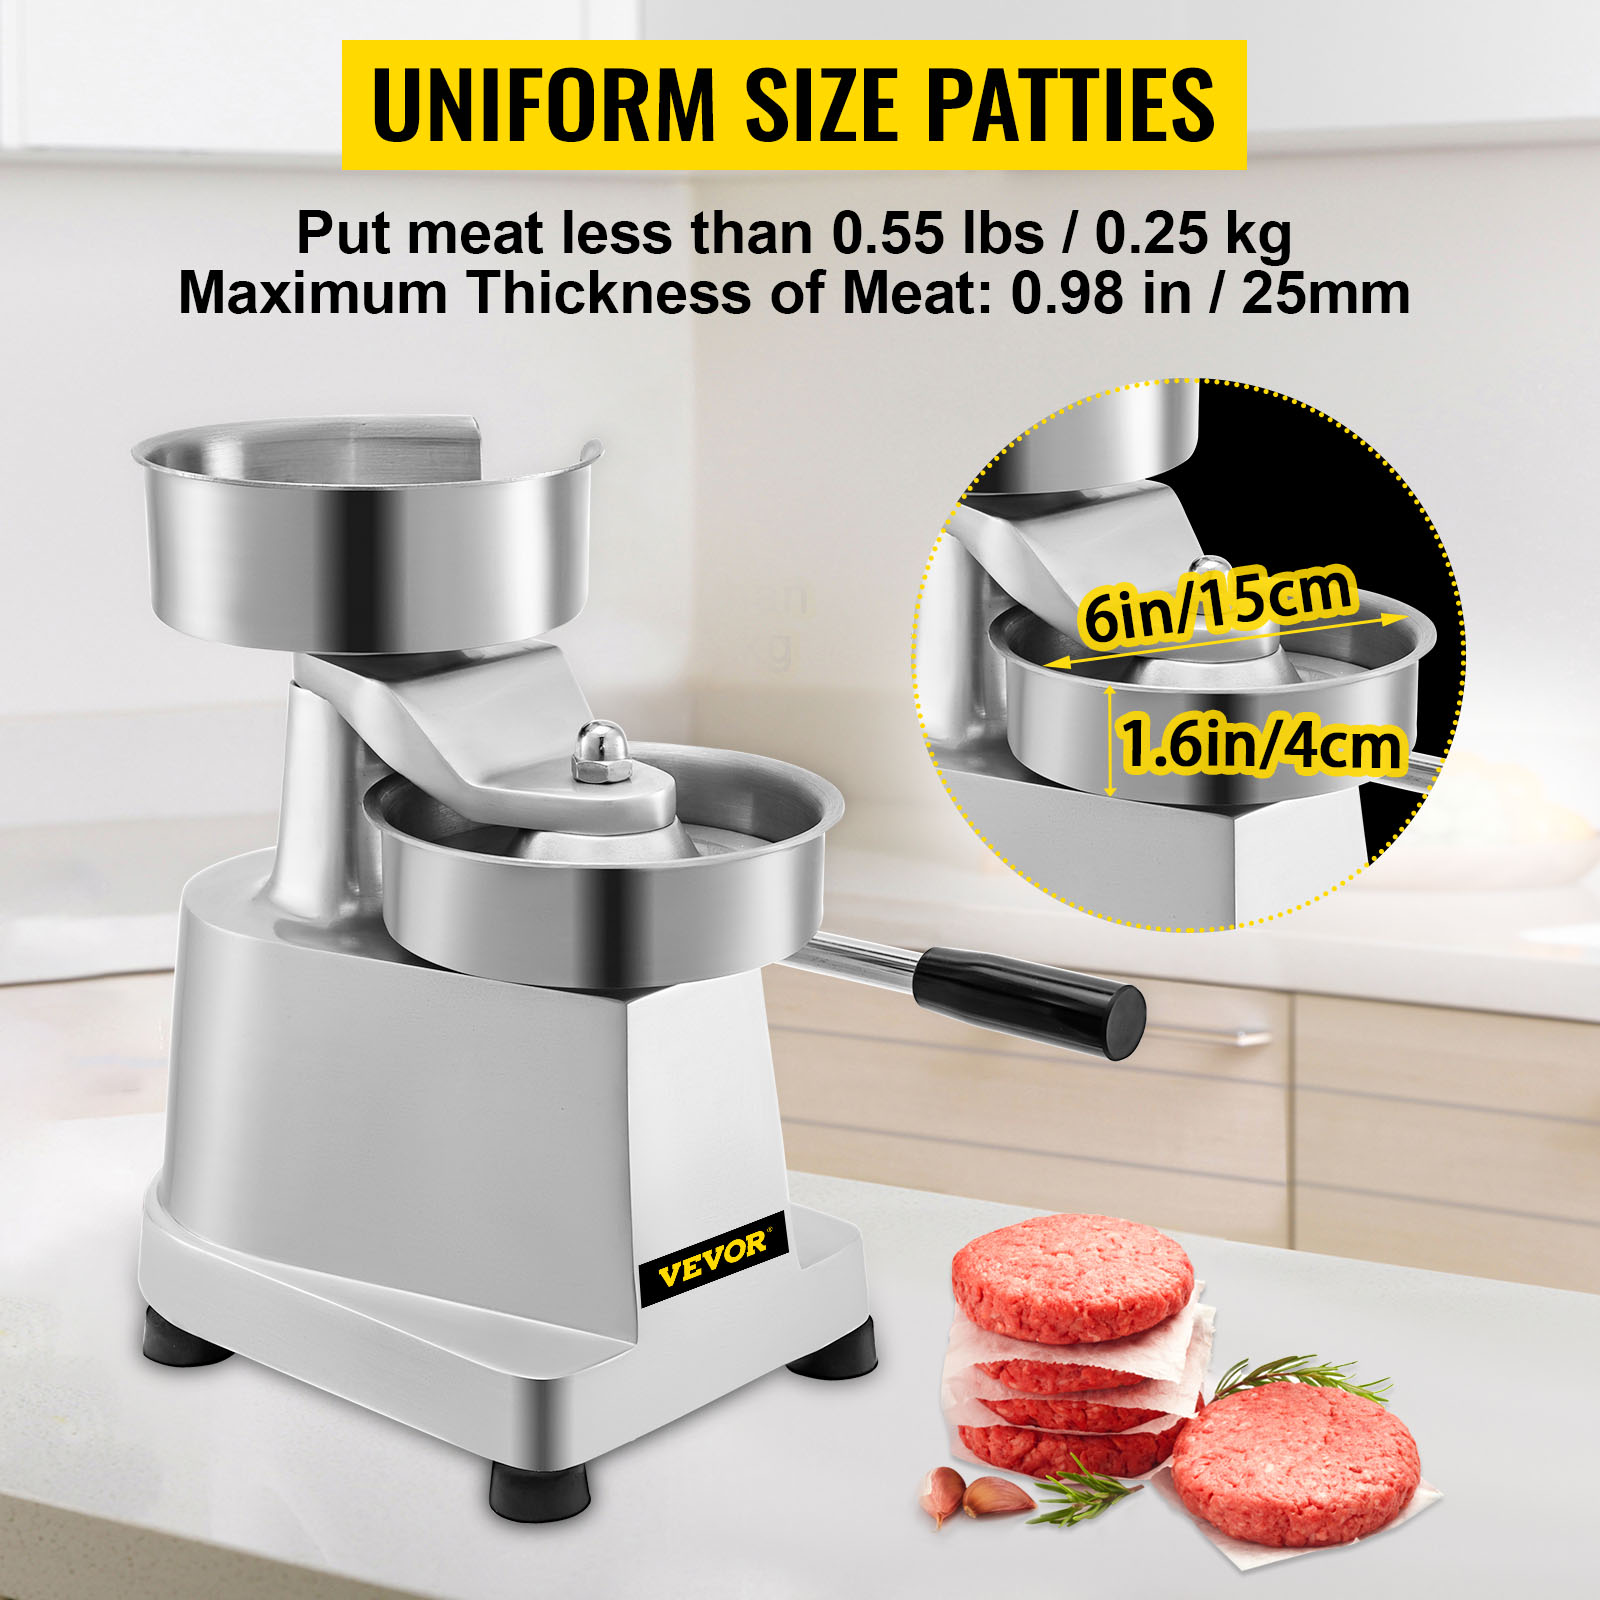 wapen proza vertrekken VEVOR Commercial Hamburger Patty Maker 150mm/6inch Stainless Steel Burger  Press Heavy Duty Hamburger Press Meat Patty Maker Hamburger Forming  Processor with 1000 Pcs Patty Papers | VEVOR US